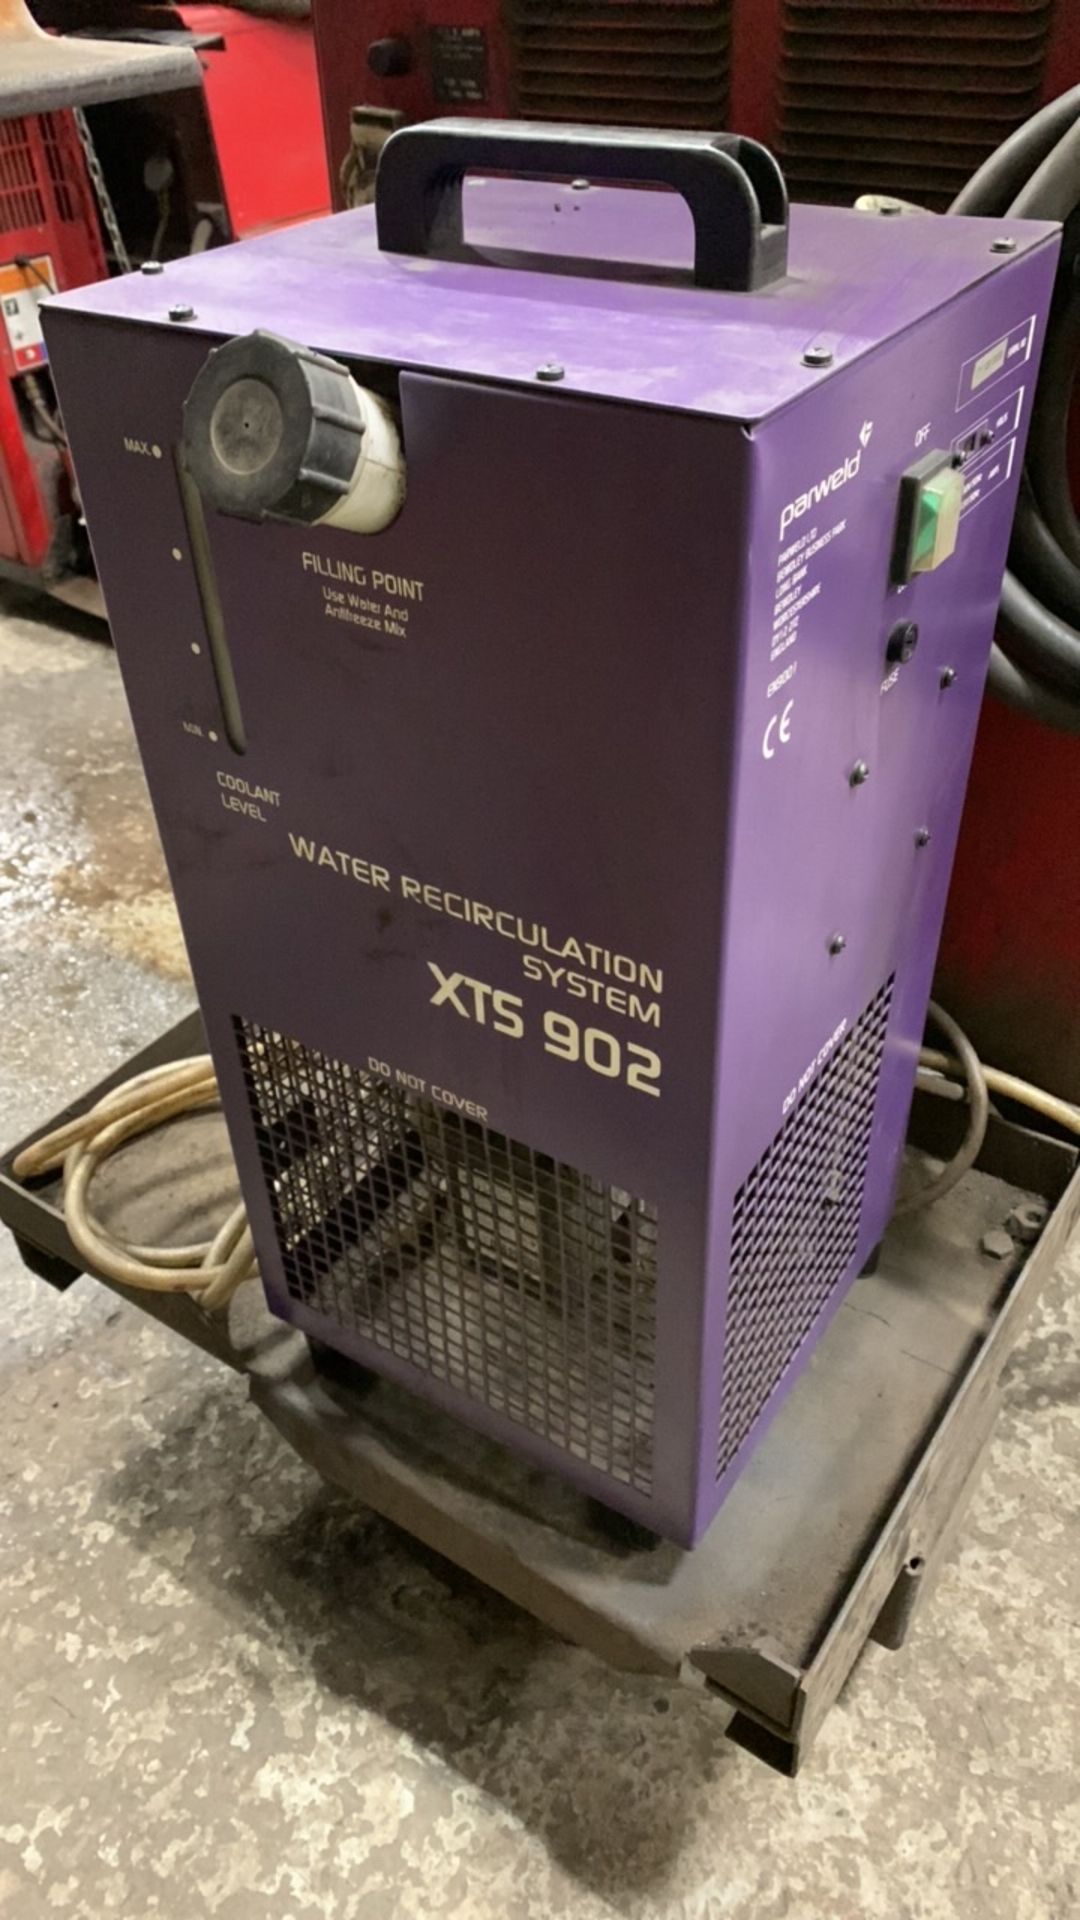 Lincoln Electric Square Wave TIG-355 Welder, Serial No. 019609044443 with Parweld XTS 902 Water Reci - Image 3 of 4